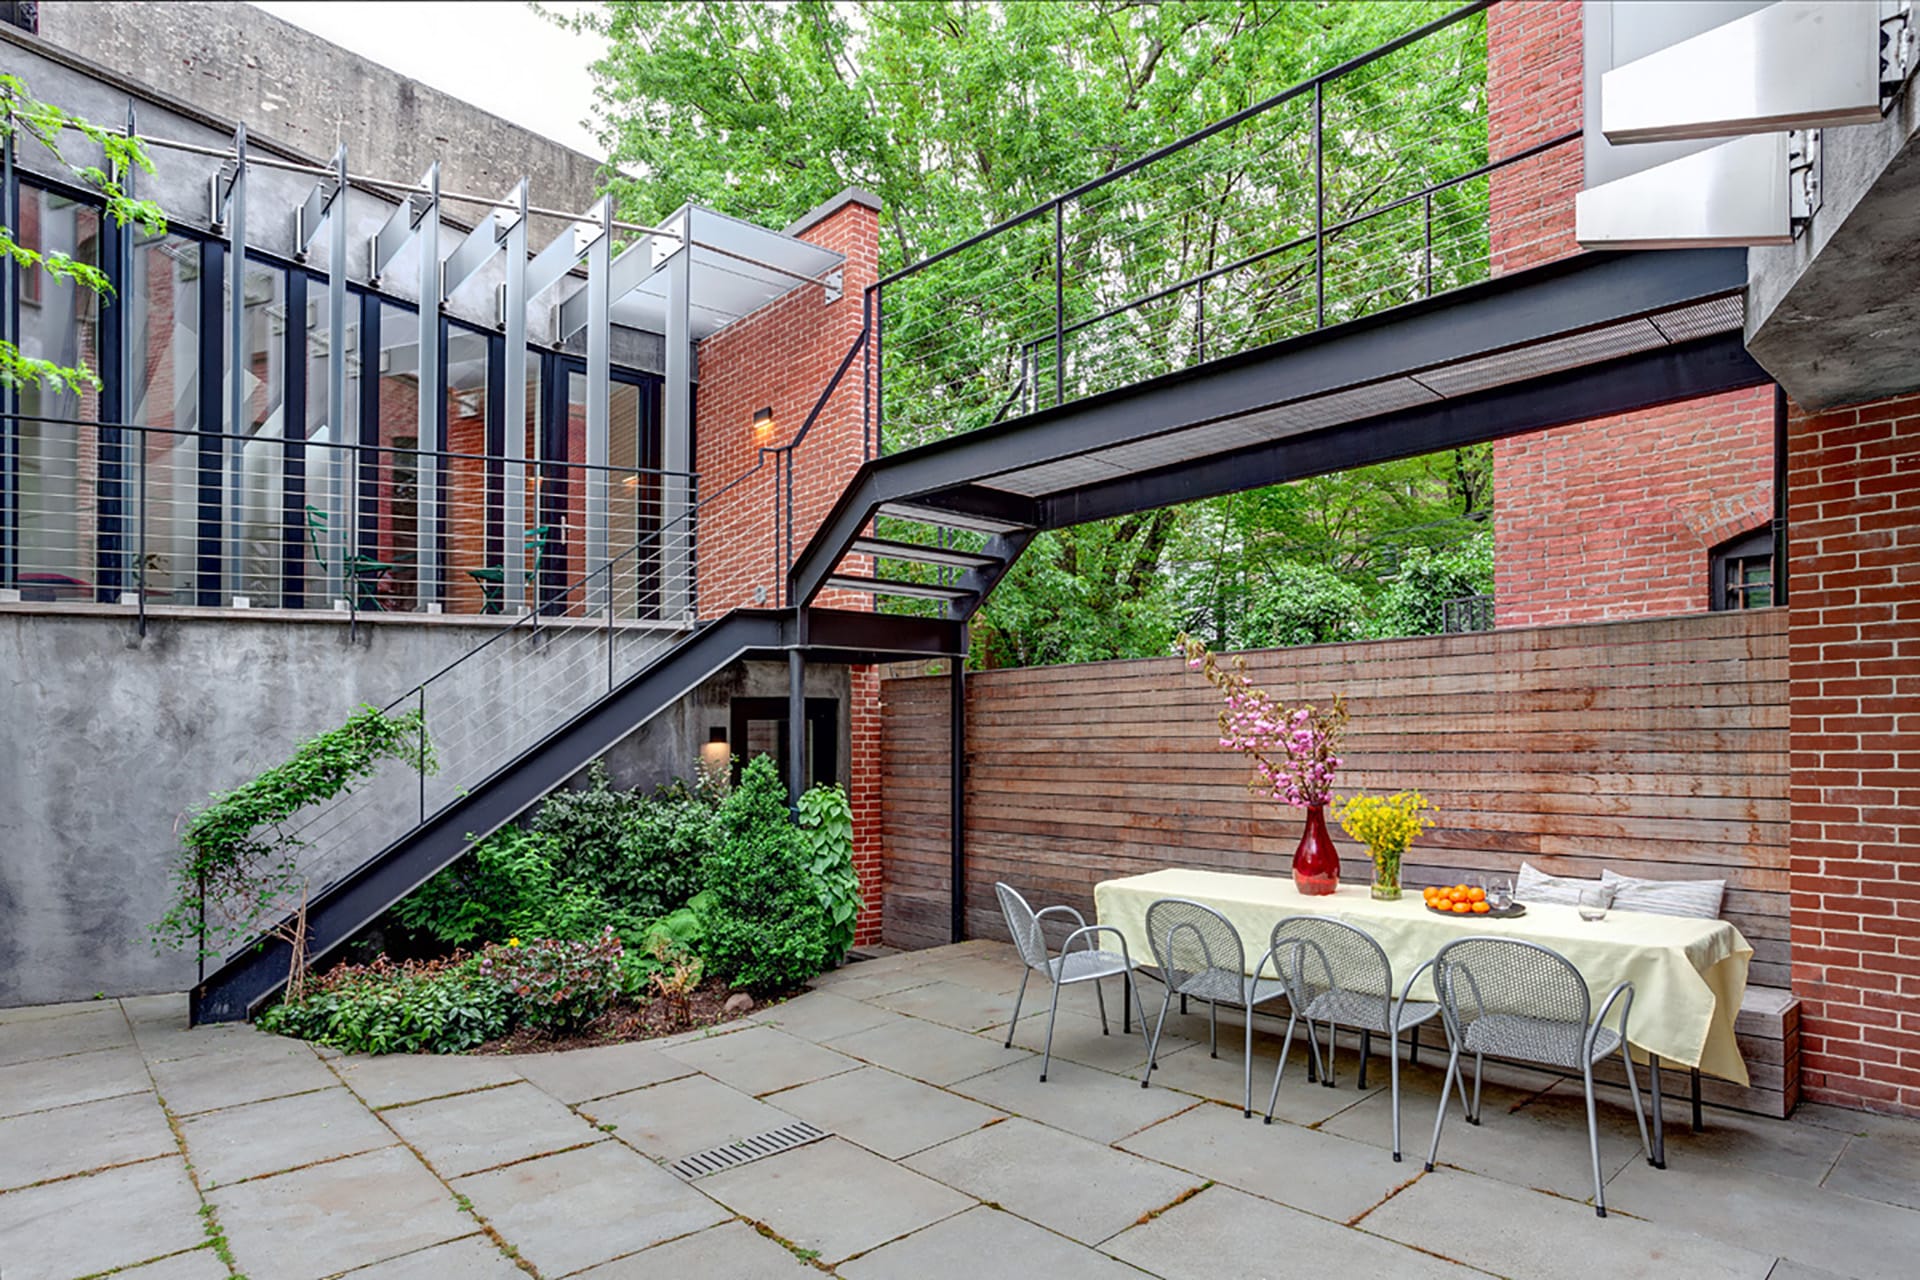 Courtyard between a townhouse and its separated garage with a suspended catwalk, bluestone pavers, and a picnic table